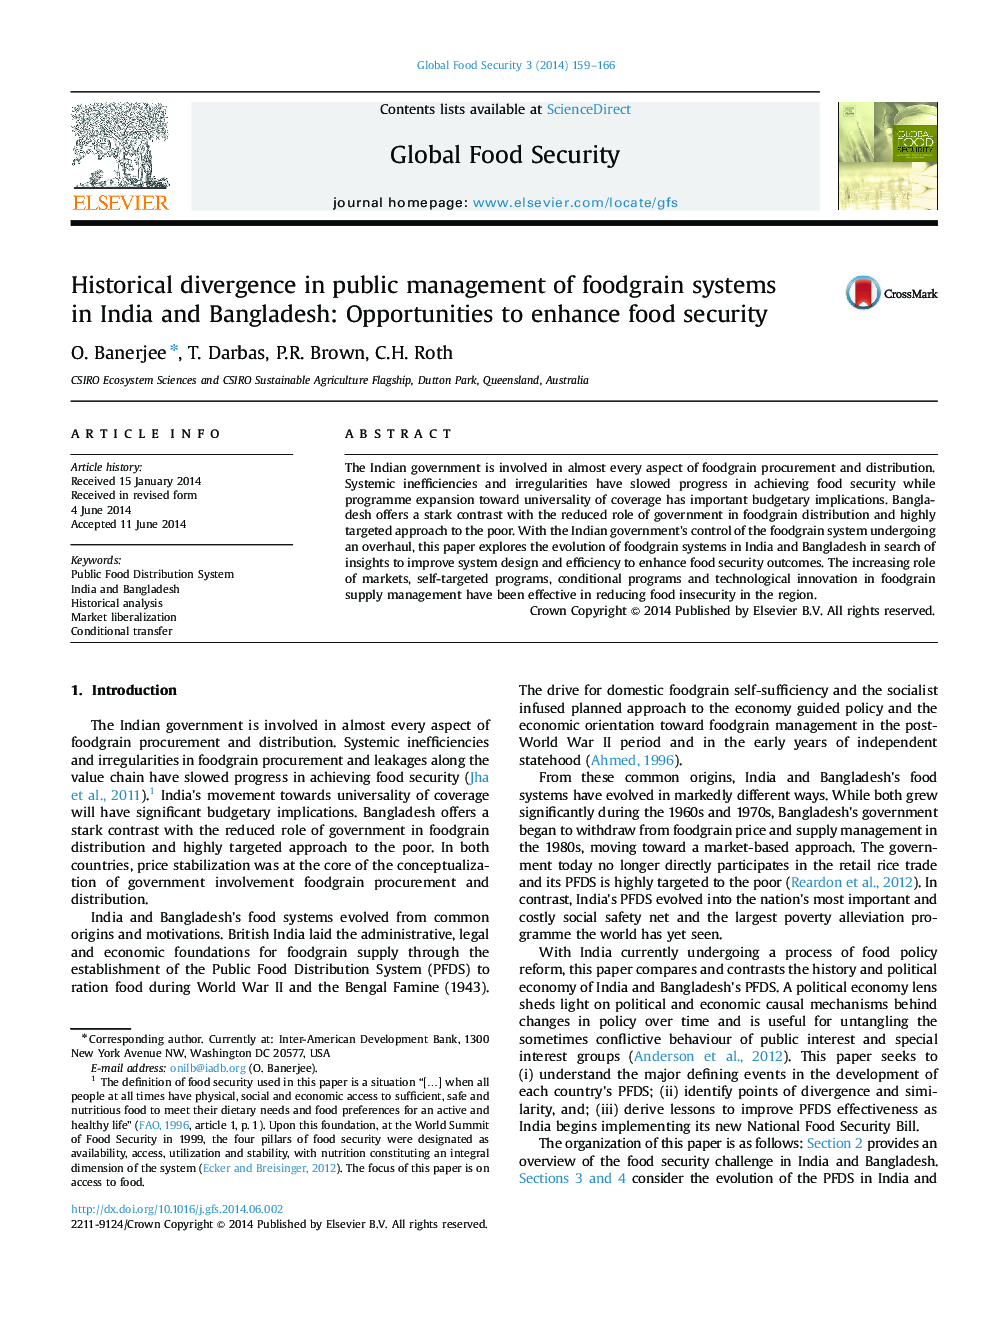 Historical divergence in public management of foodgrain systems in India and Bangladesh: Opportunities to enhance food security